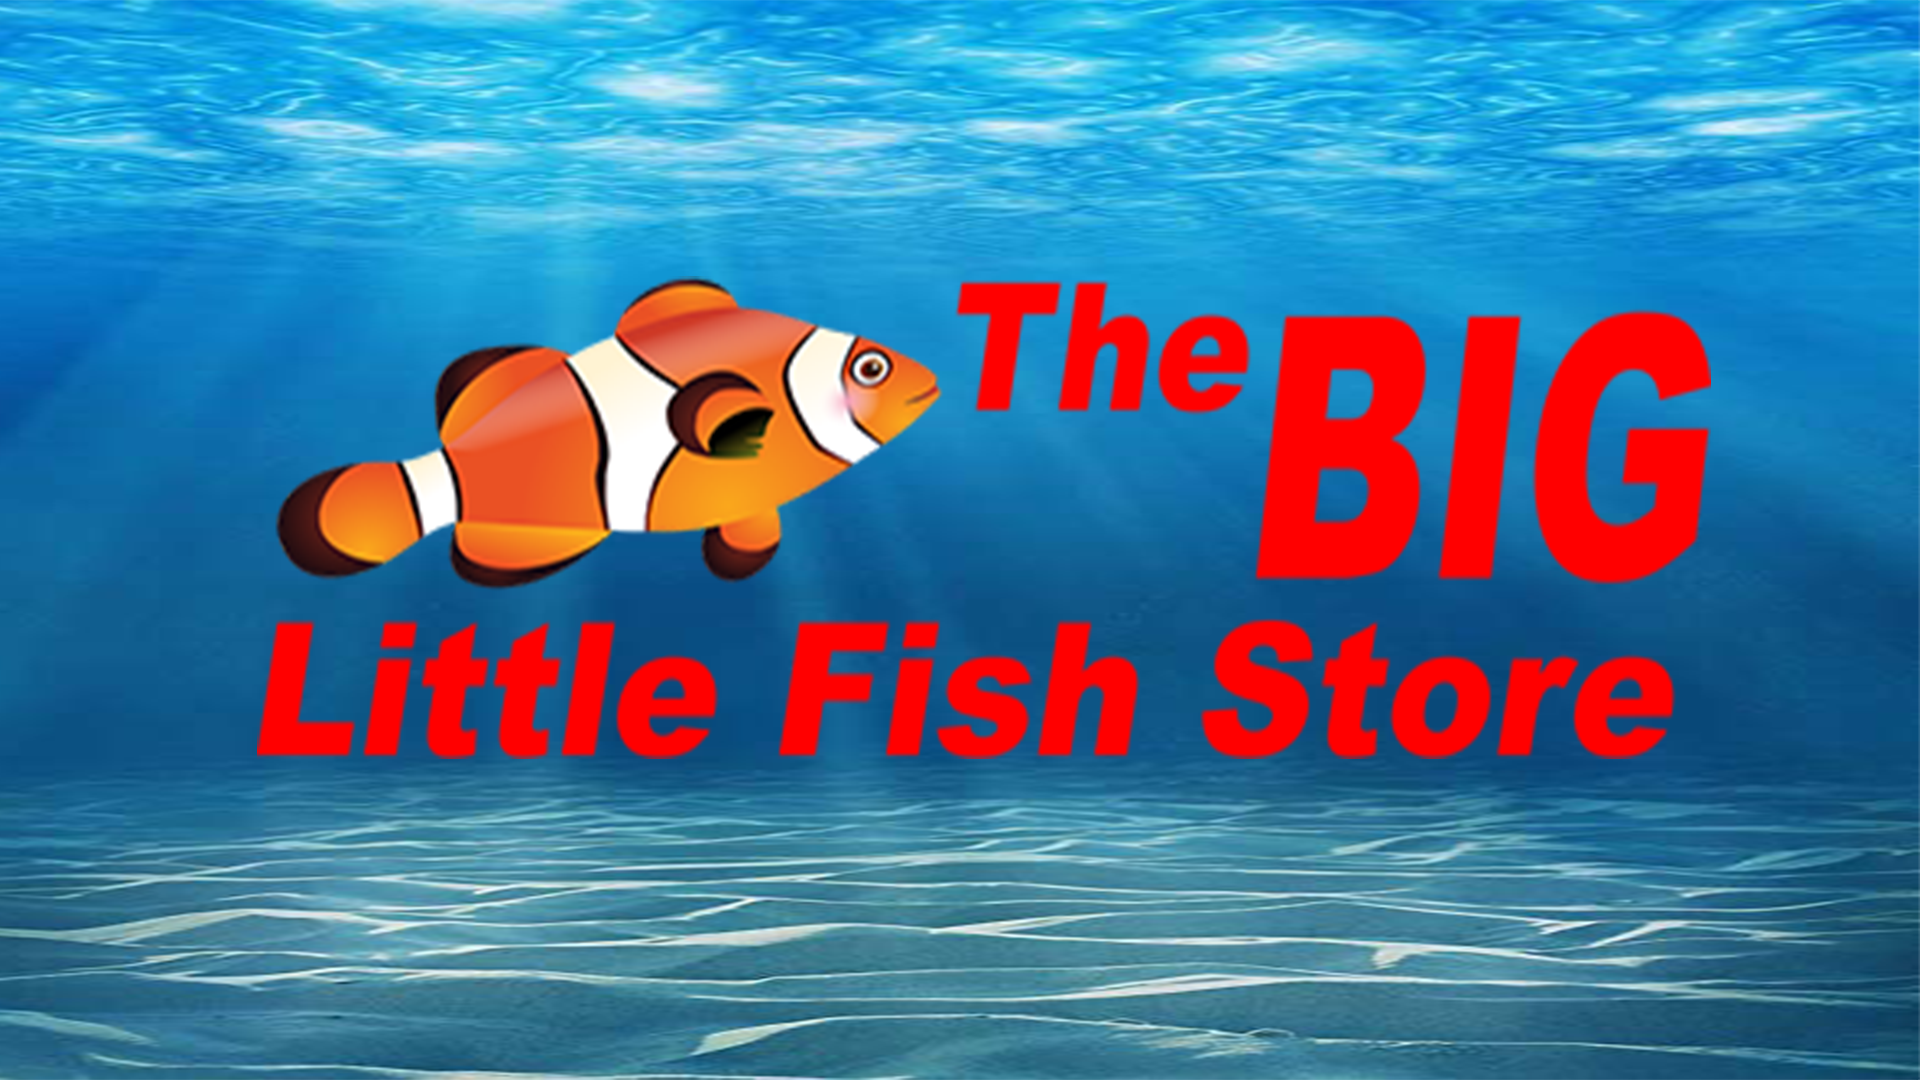 The Big Little Fish Store